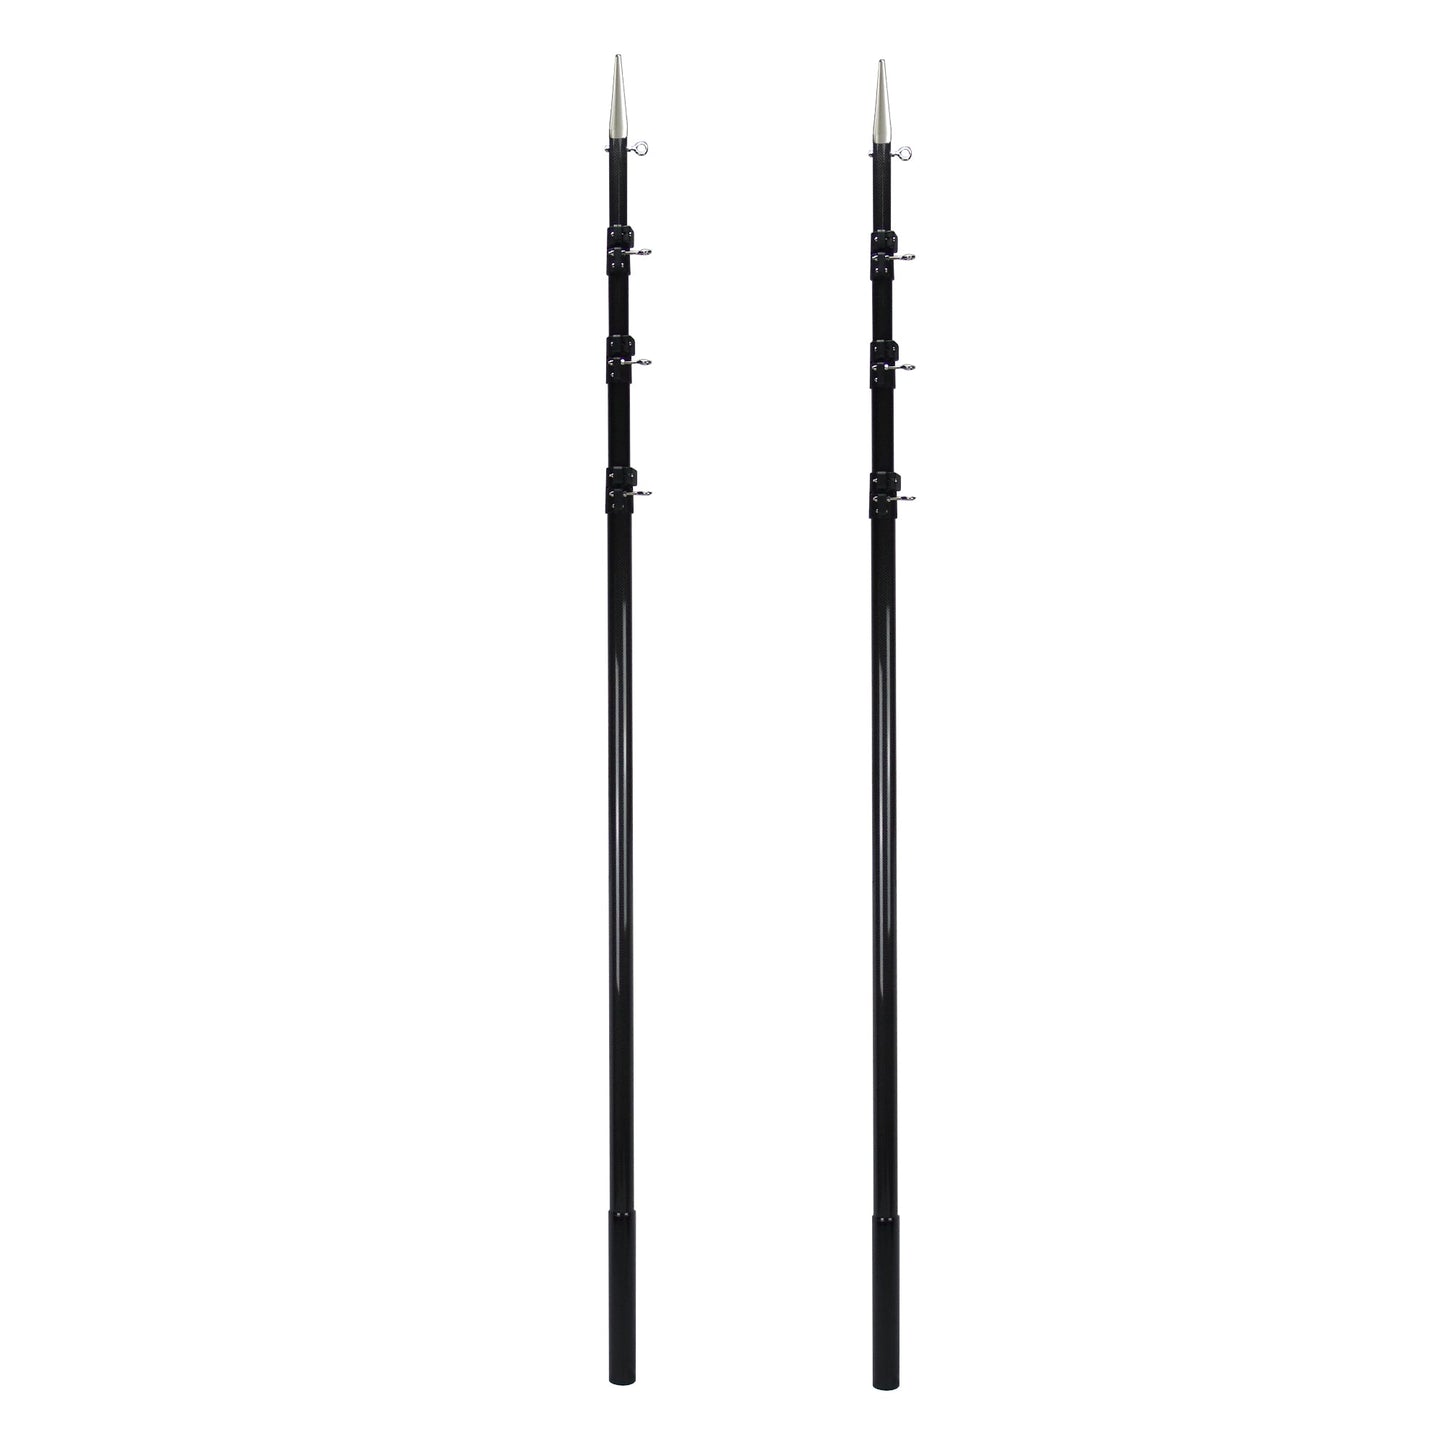 Reelax T-Topper with 4.5m Telescopic 3K Carbon Poles & Rigging Complete Kit-Outriggers & Accessories-Reelax-Fishing Station